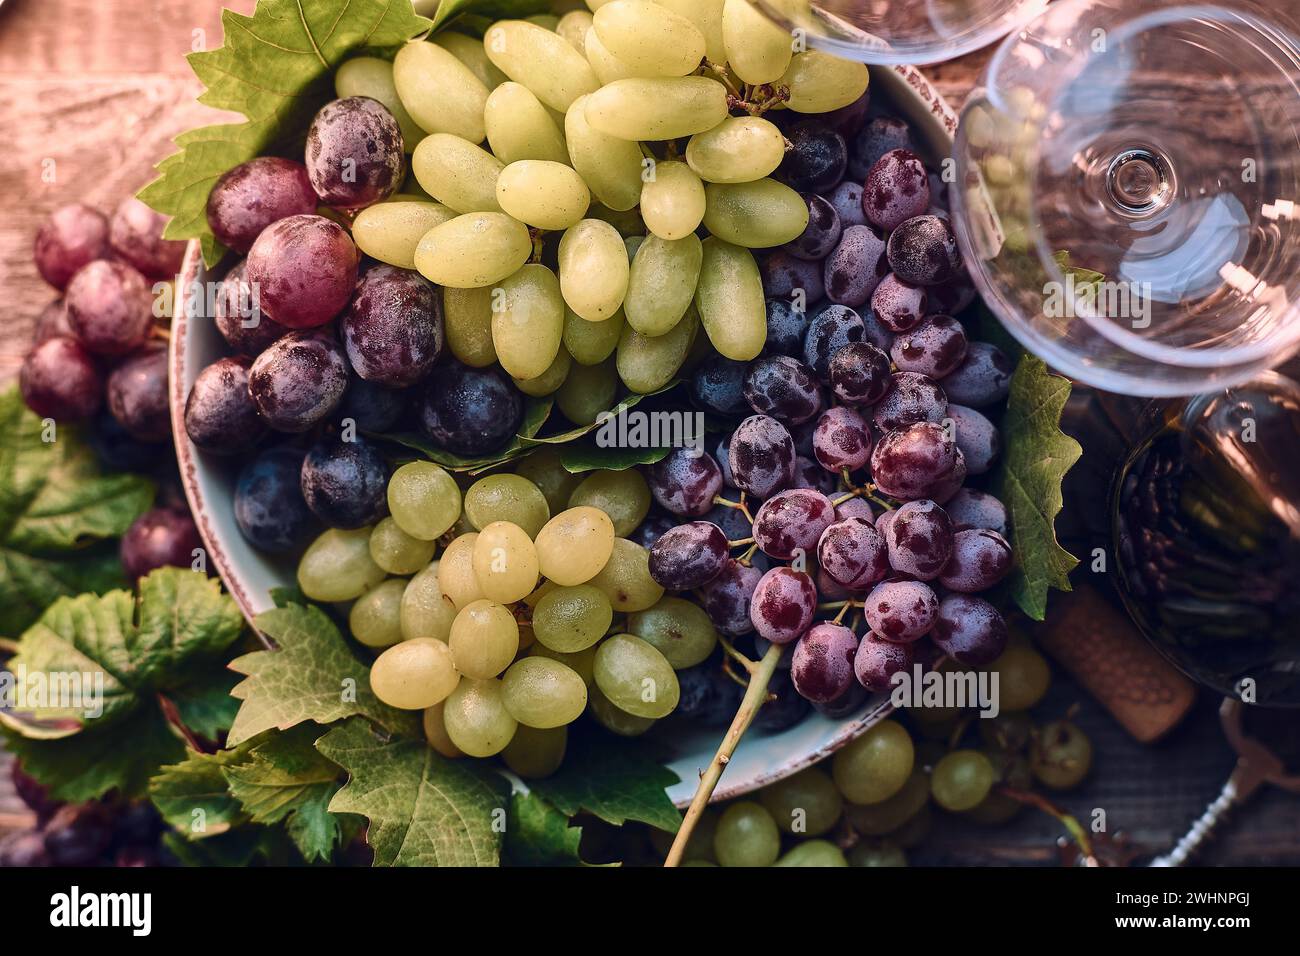 Grapes in a bowl on wooden table Stock Photo